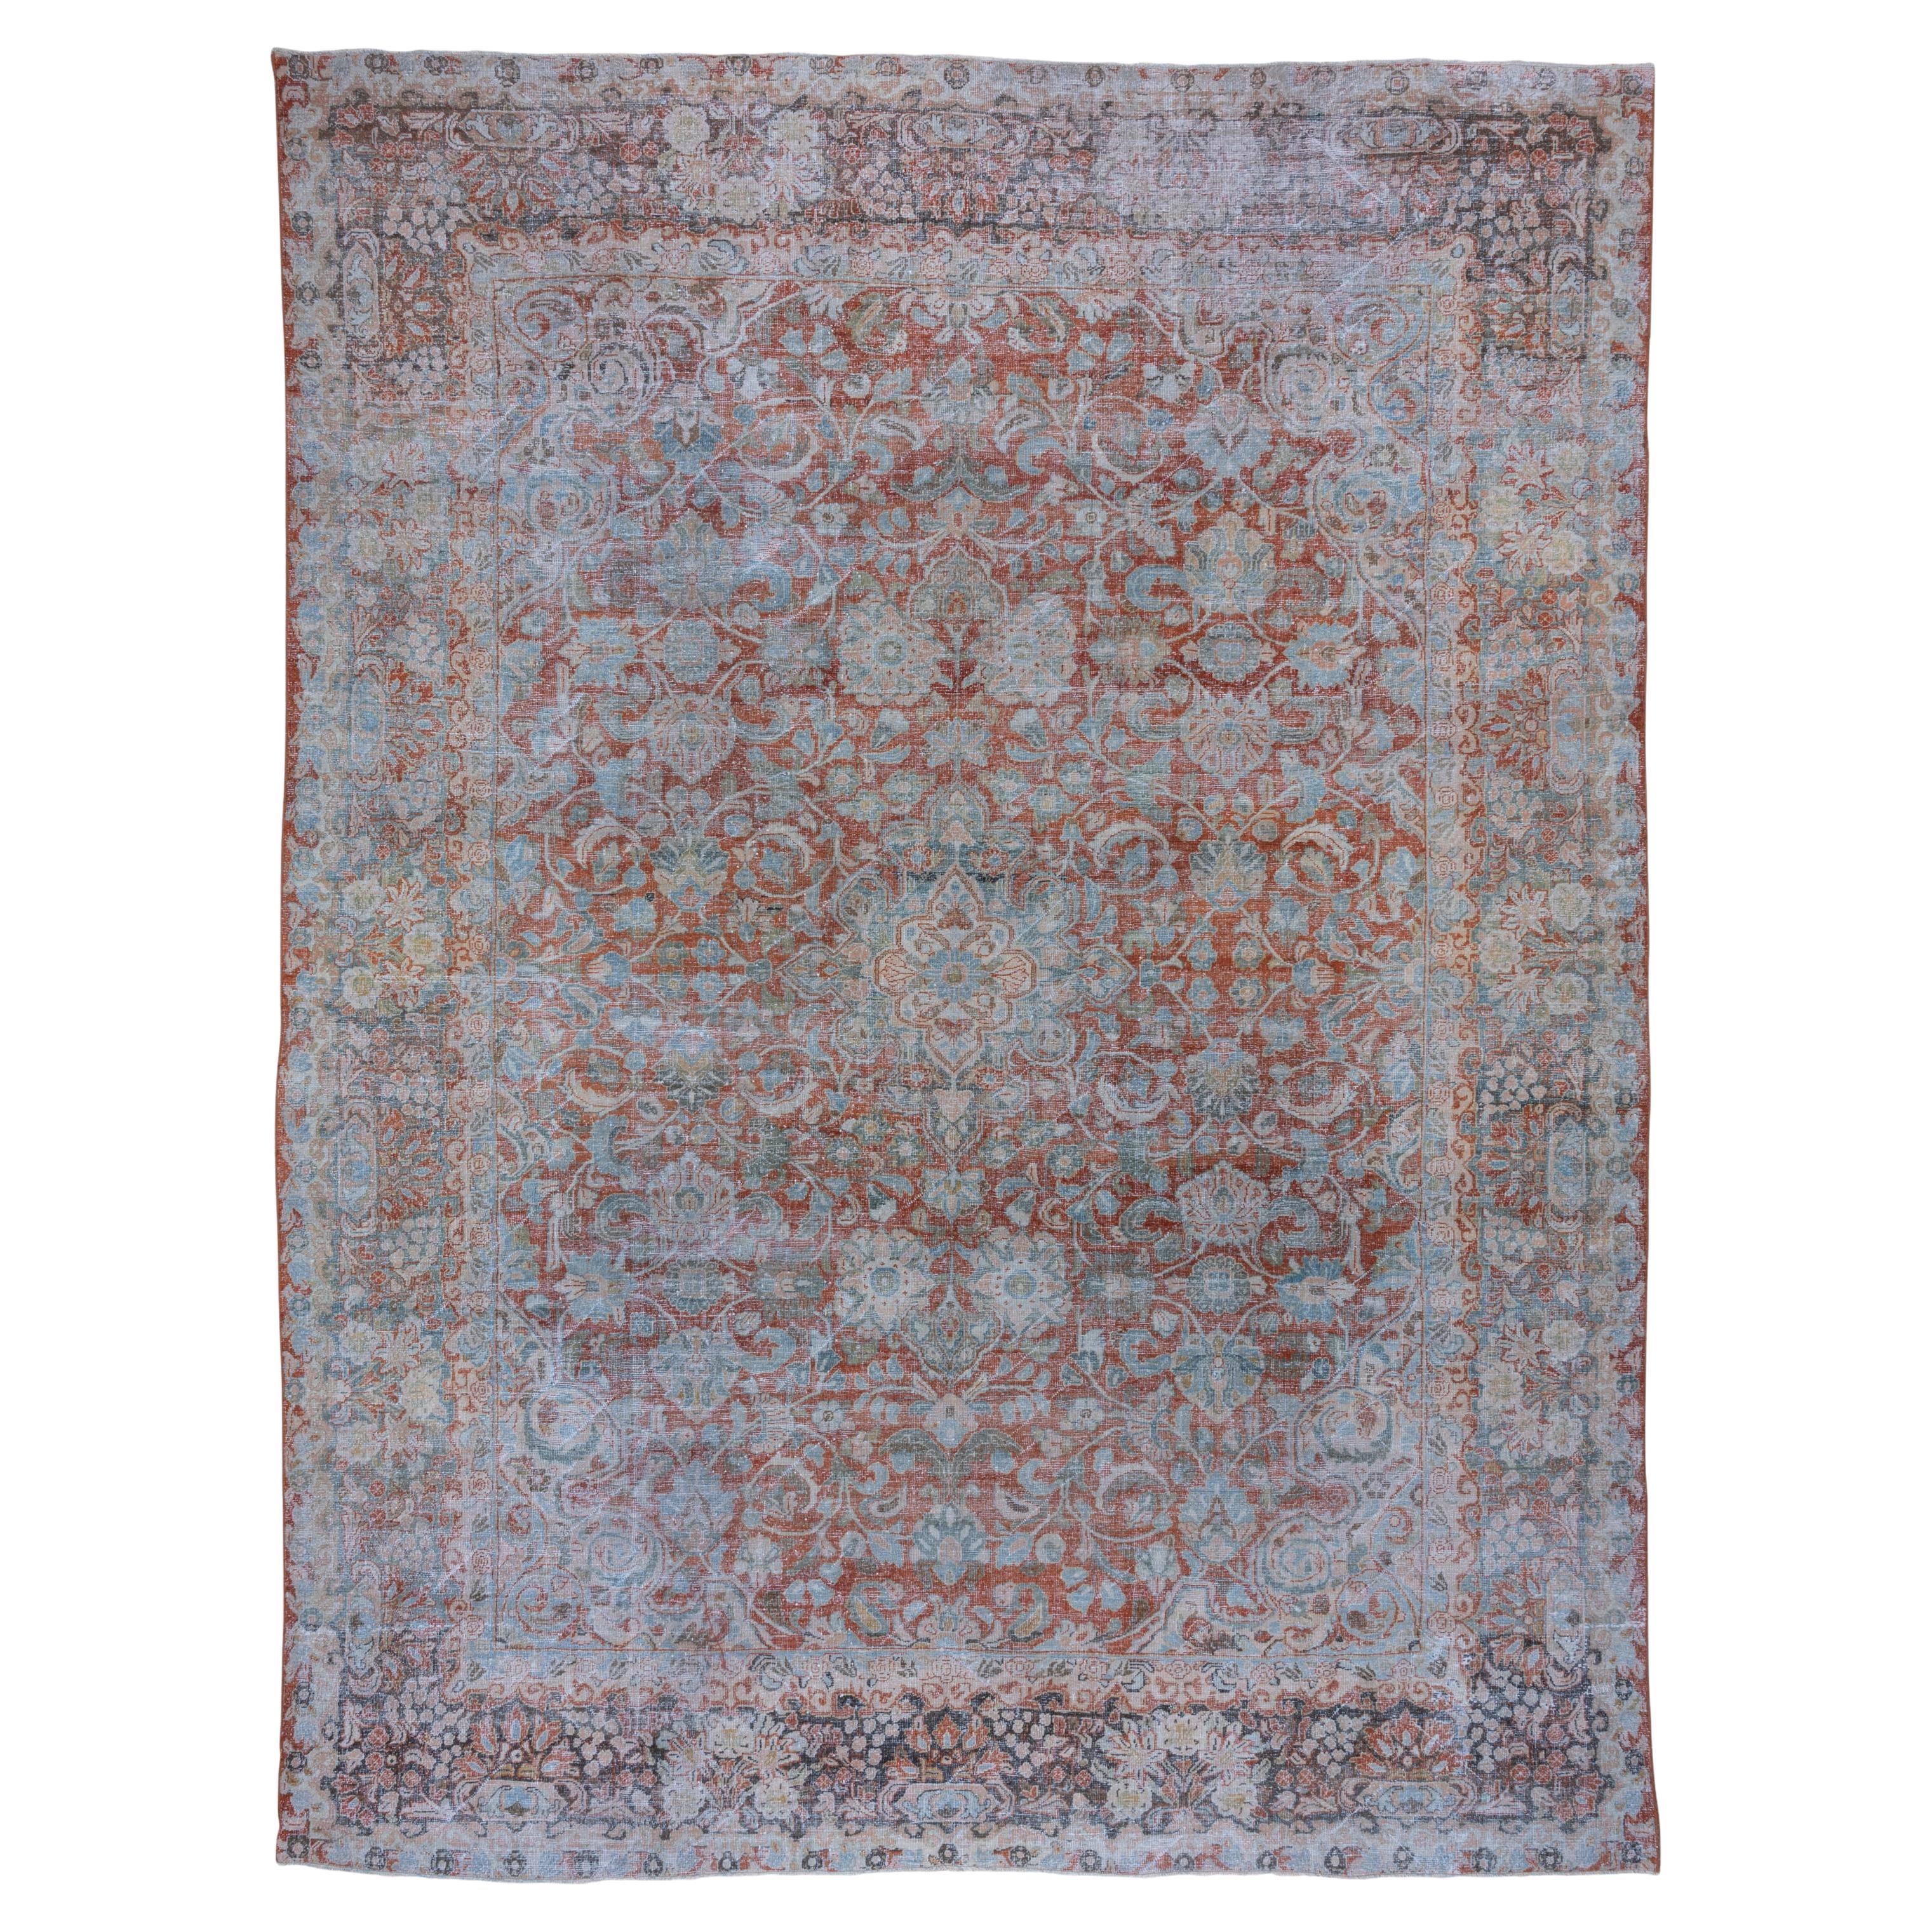 Antique Distressed Red Persian Mahal Carpet, All-Over Field, Blue Accents